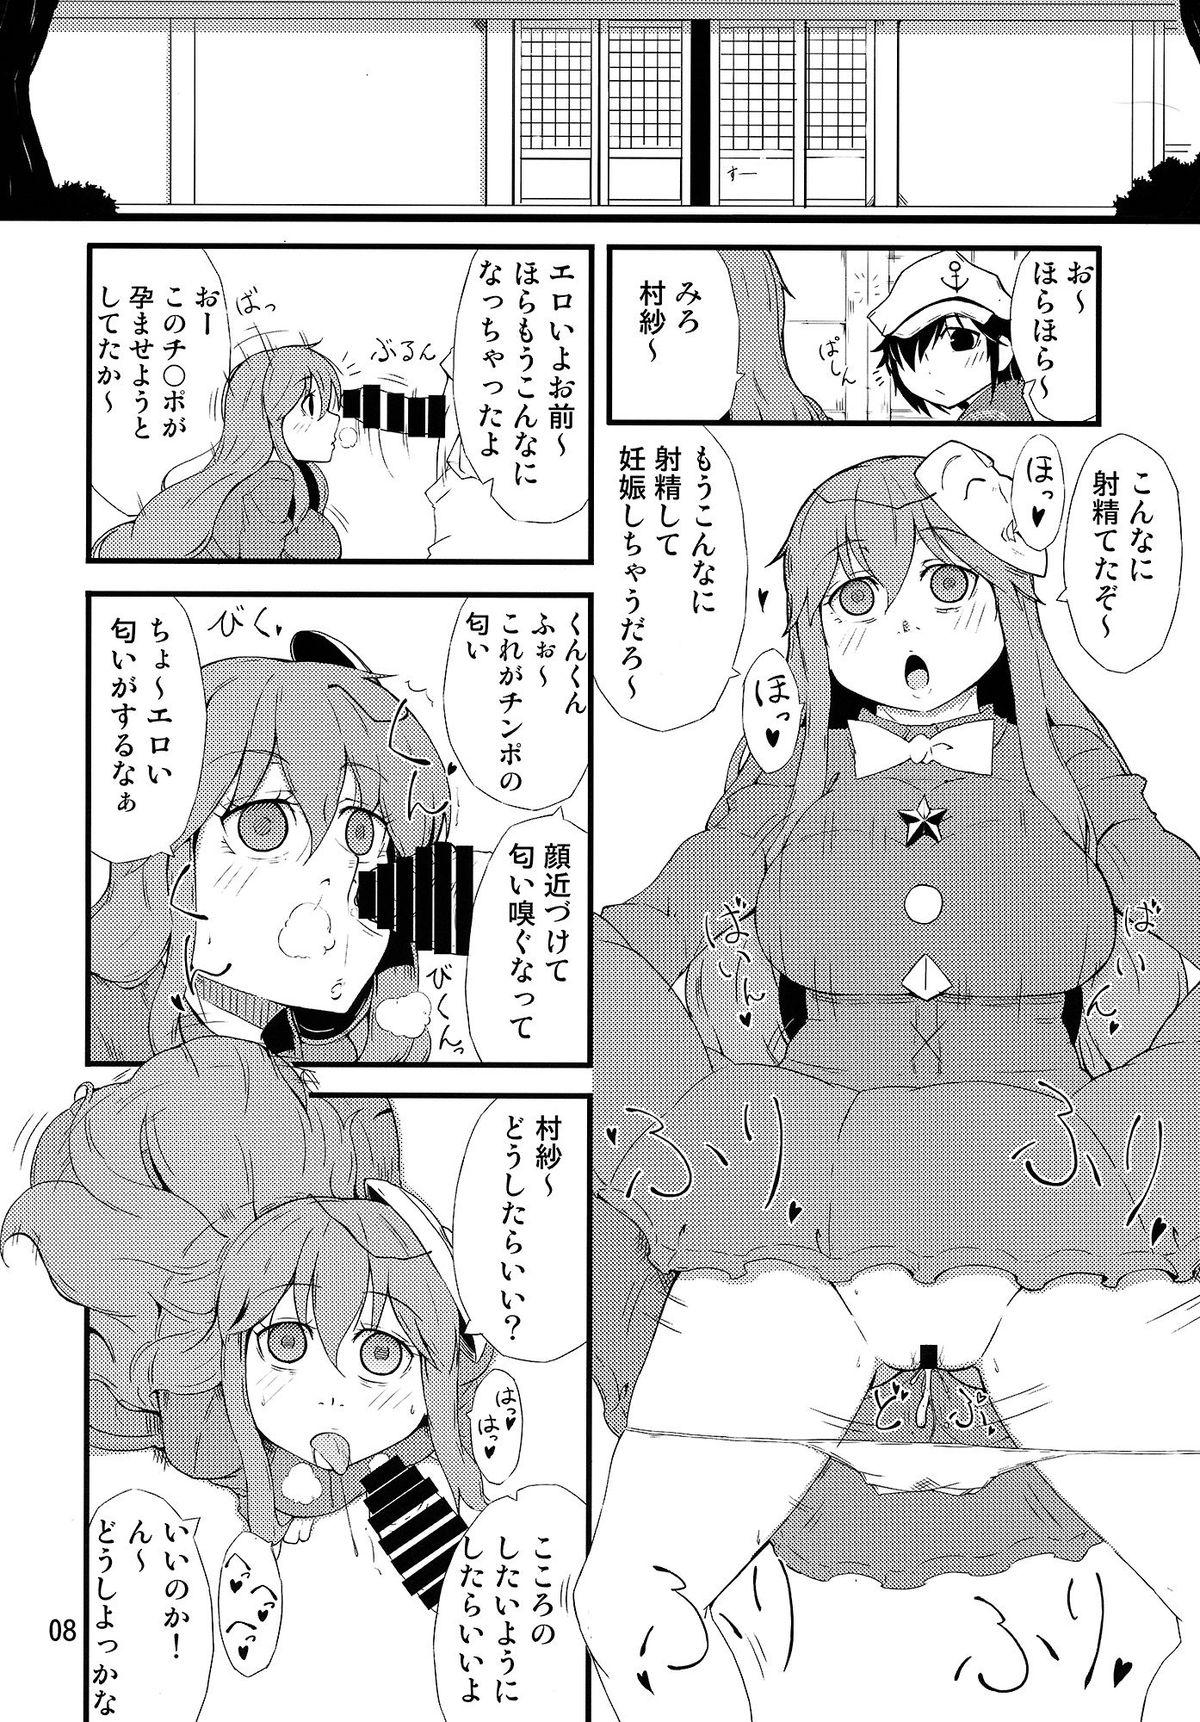 Mouth FAKE FACE - Touhou project Gang - Page 7